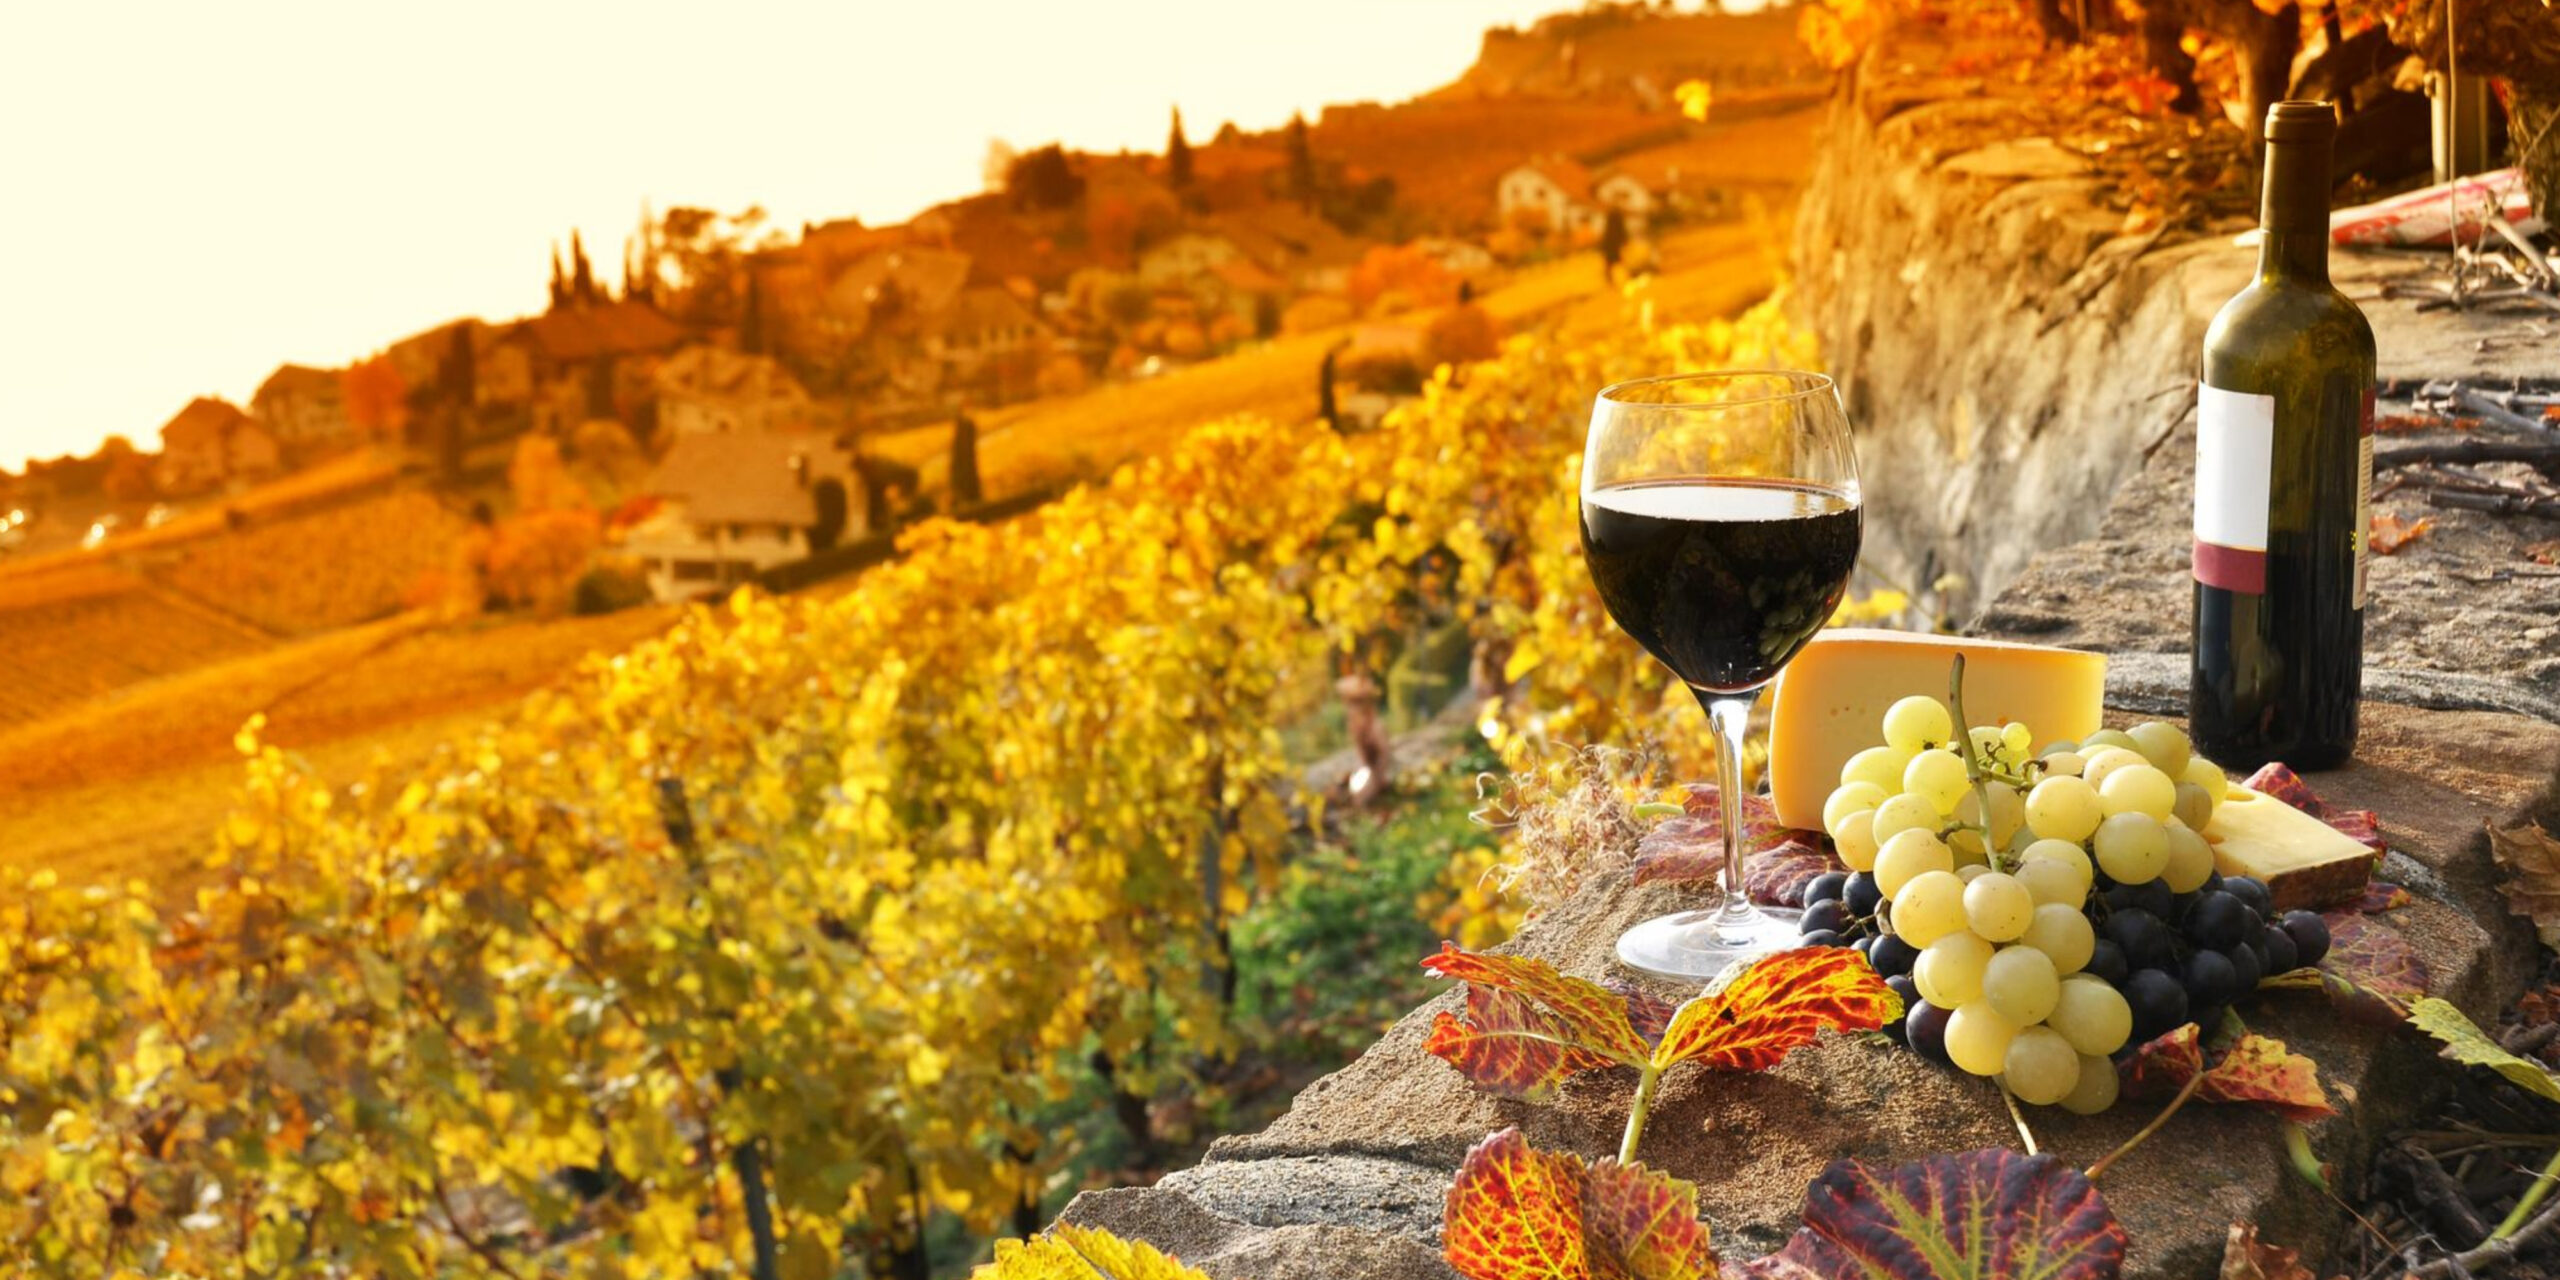 Expert-Led Tours Will Immerse You in Tuscany’s Culture